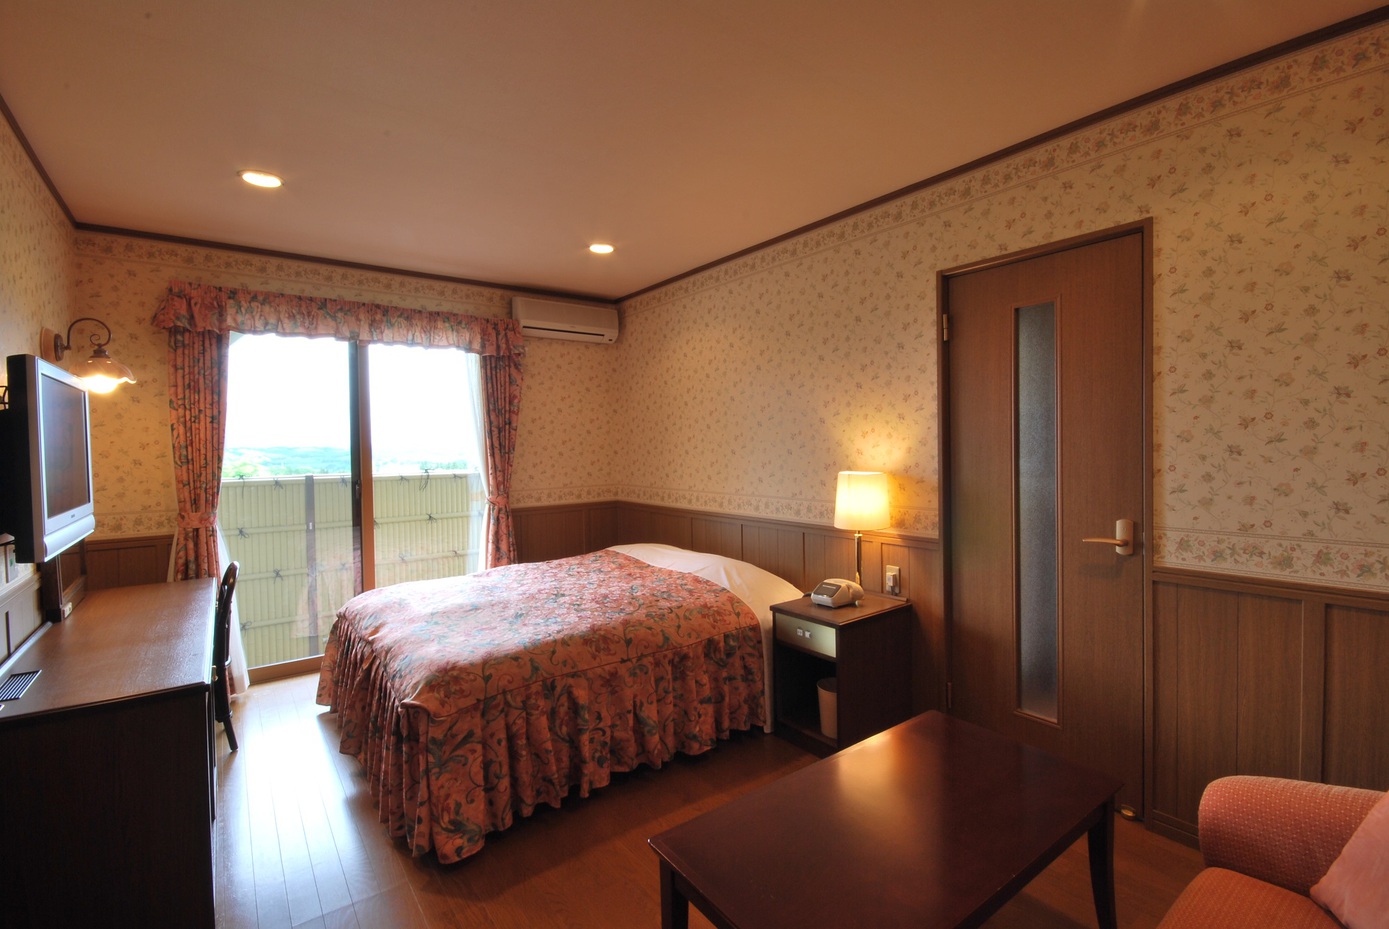 Healing Inn White Pension Ideally located in the Inawashiro area, Healing Inn White Pension promises a relaxing and wonderful visit. The property has everything you need for a comfortable stay. Free Wi-Fi in all rooms are just